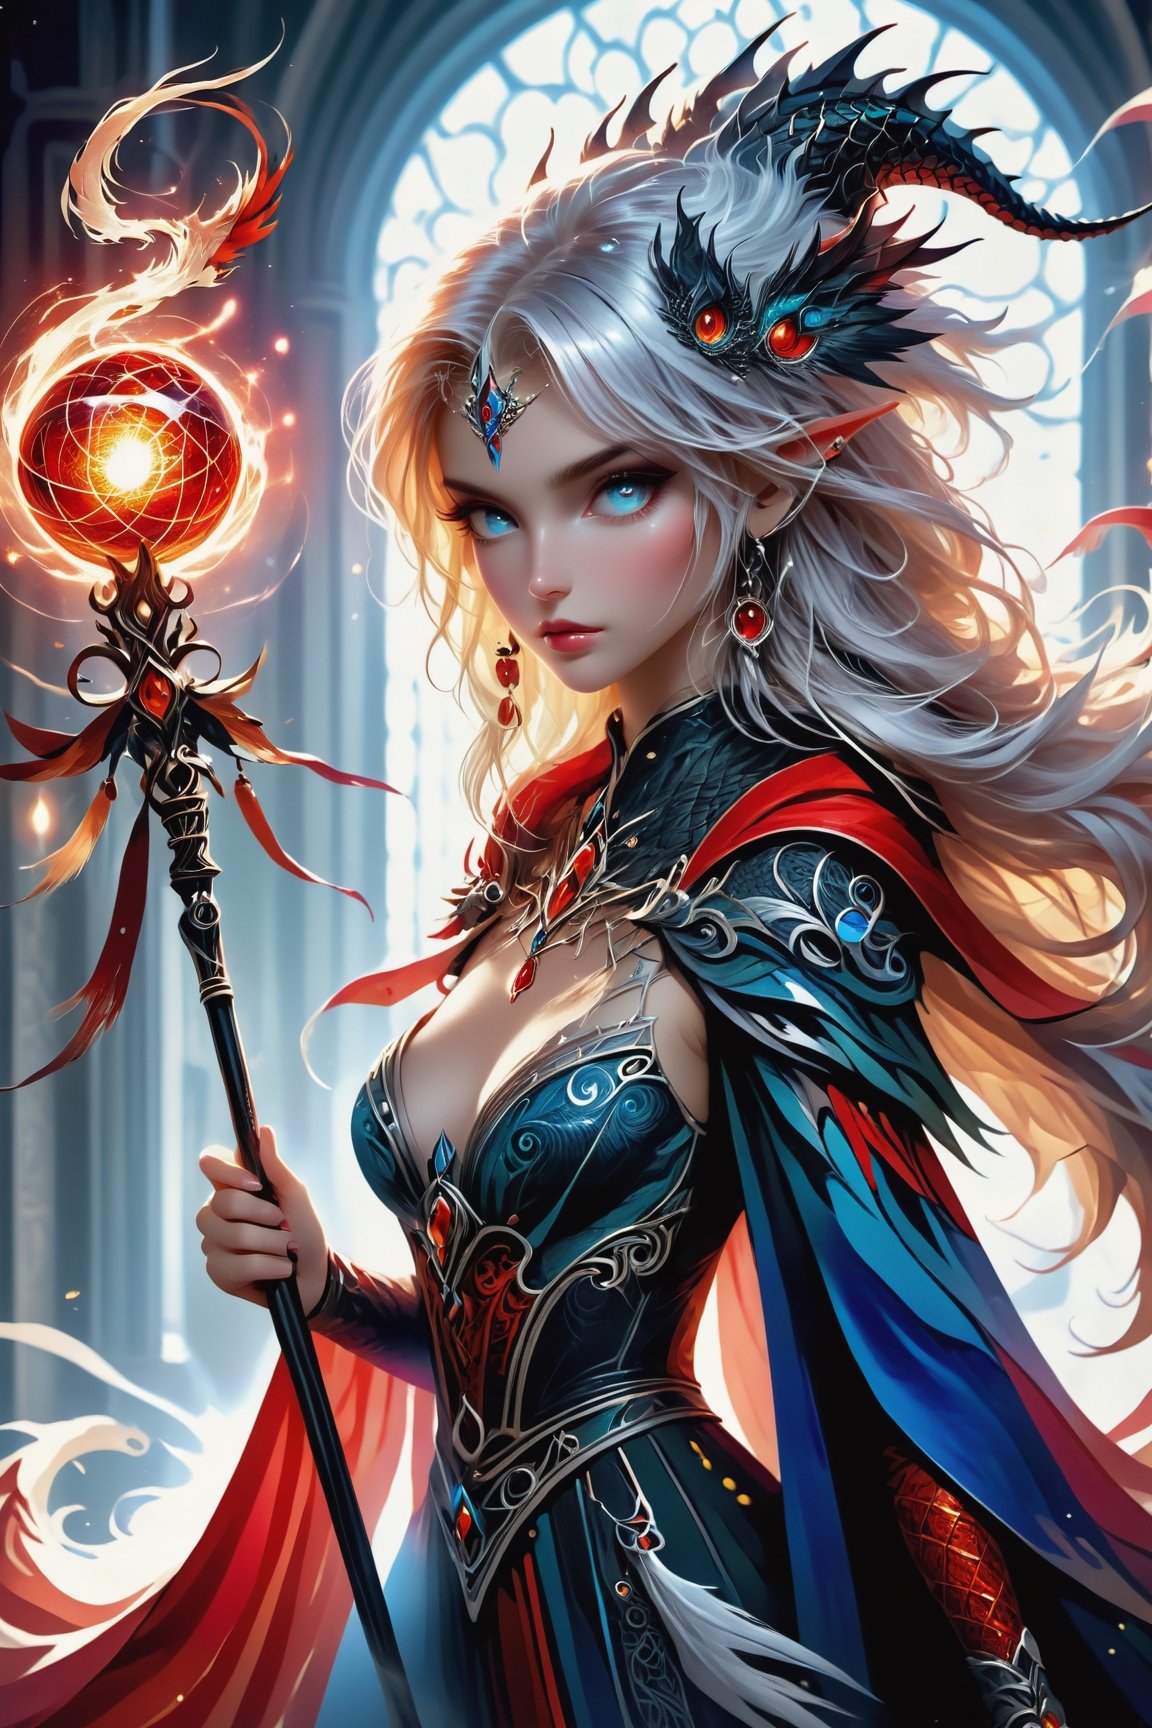 (masterpiece), Slender woman holds in her hand a dragon staff with natural white ostrich feathers, (highlights the figure and style of the dragon sorceress), the woman has an appearance of a powerful dragon sorceress, The image has a geometric art style, with simple shapes and solid colors, which give it an elegant and sober look, real and detailed, highlights the color of your eyes, the image must be high impact, the background must be dark and contrast with the figure of the girl, The image must have a high detail resolution of 8k, (full body), (artistic pose of a woman),Leonardo style,A dancing girl,Face makeup,DonMM4g1cXL,darkart,orbstaff,Dragon theme,gemsdragon